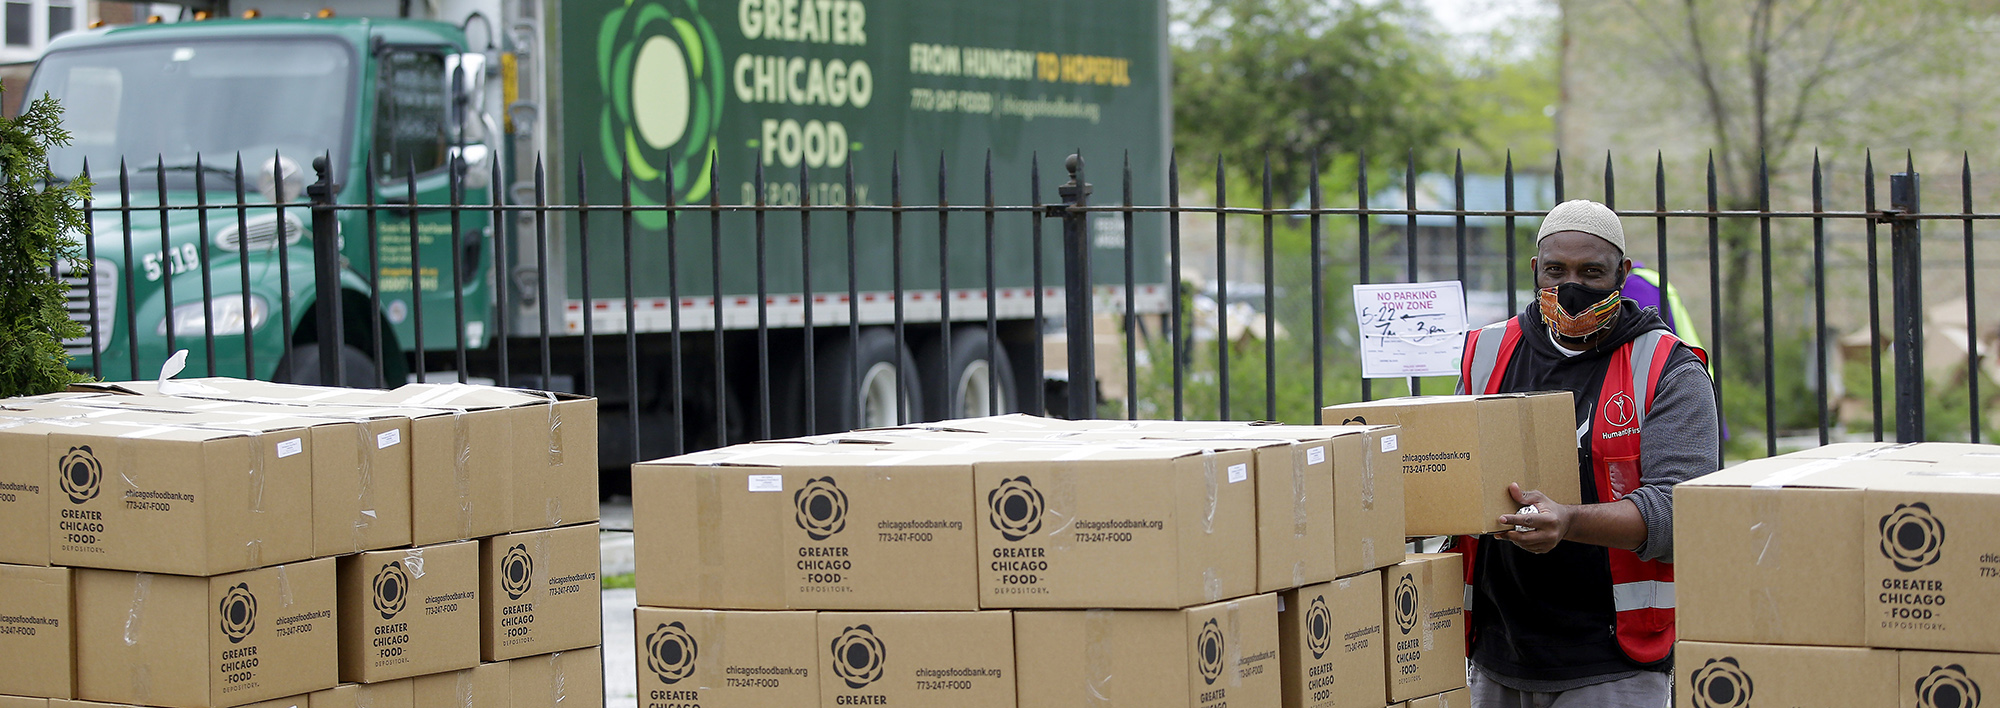 United Center Helps Store Food For Greater Chicago Food Depository During  COVID-19 Crisis - CBS Chicago